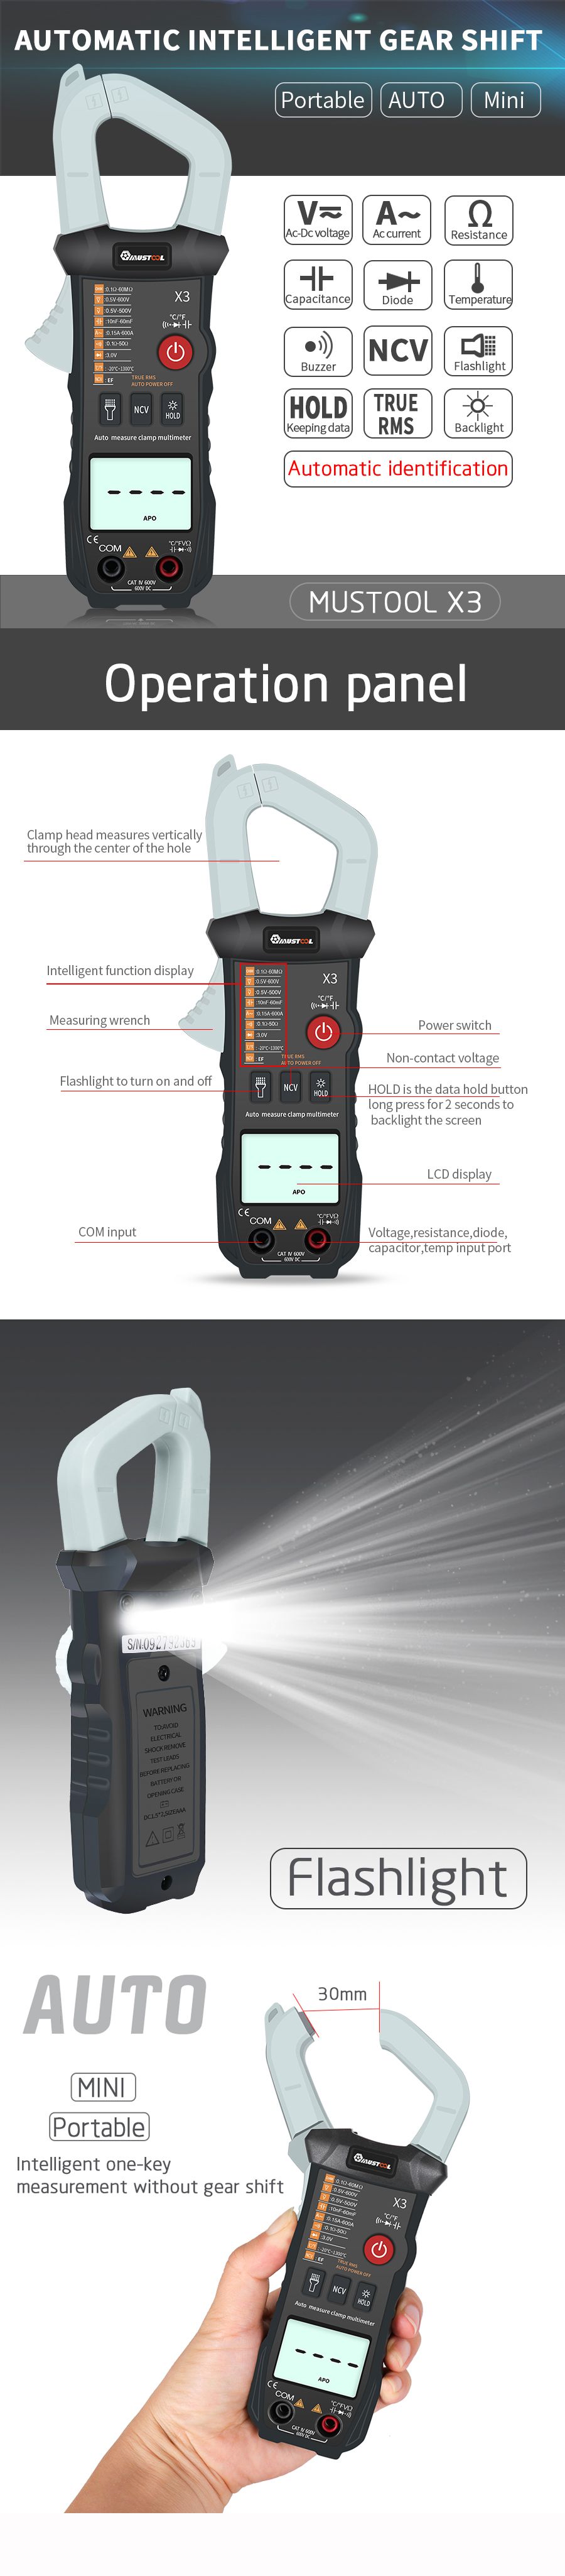 MUSTOOL-X3-Fully-Intelligent-True-RMS-Clamp-Meter-6000-Counts-Automatic-Identification-Digital-Multi-1525781